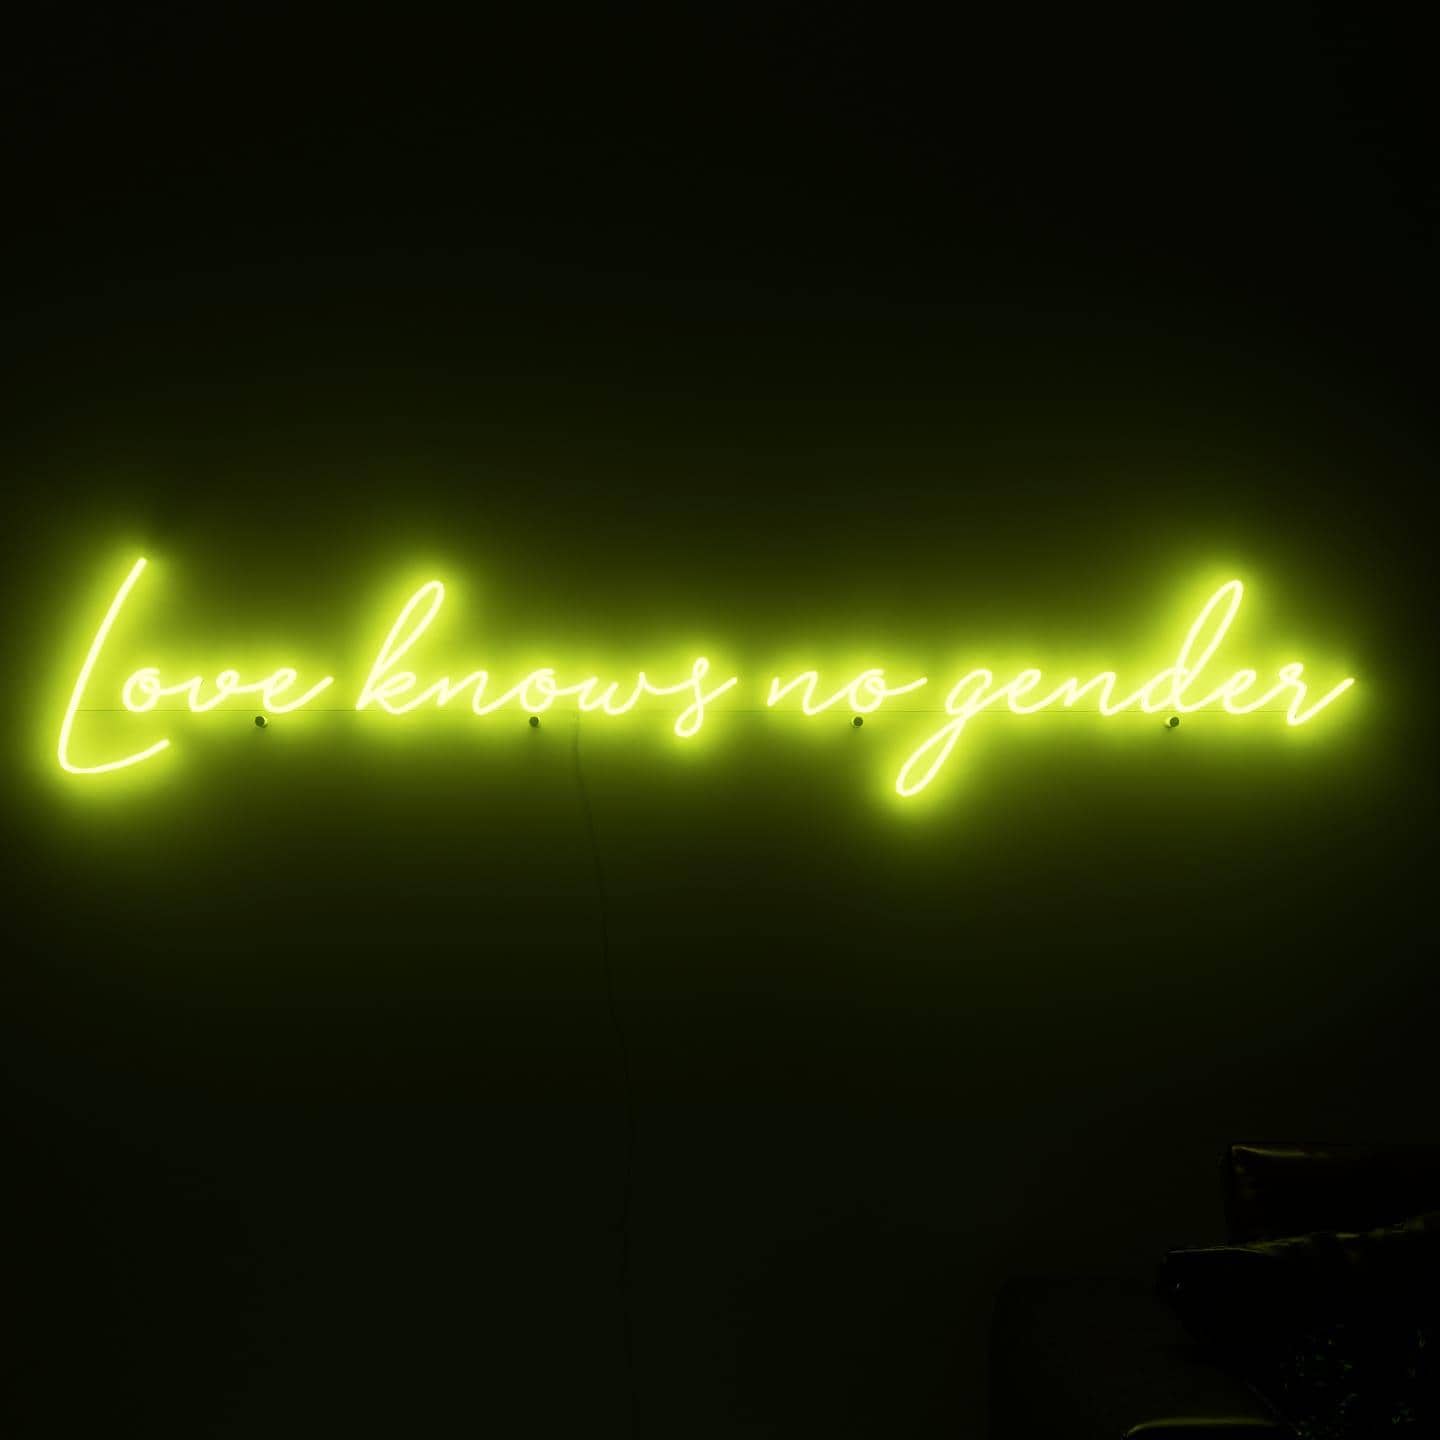 dark-night-shot-with-golden-neon-lights-hanging-on-the-wall-for-display-love-knows-no-gender